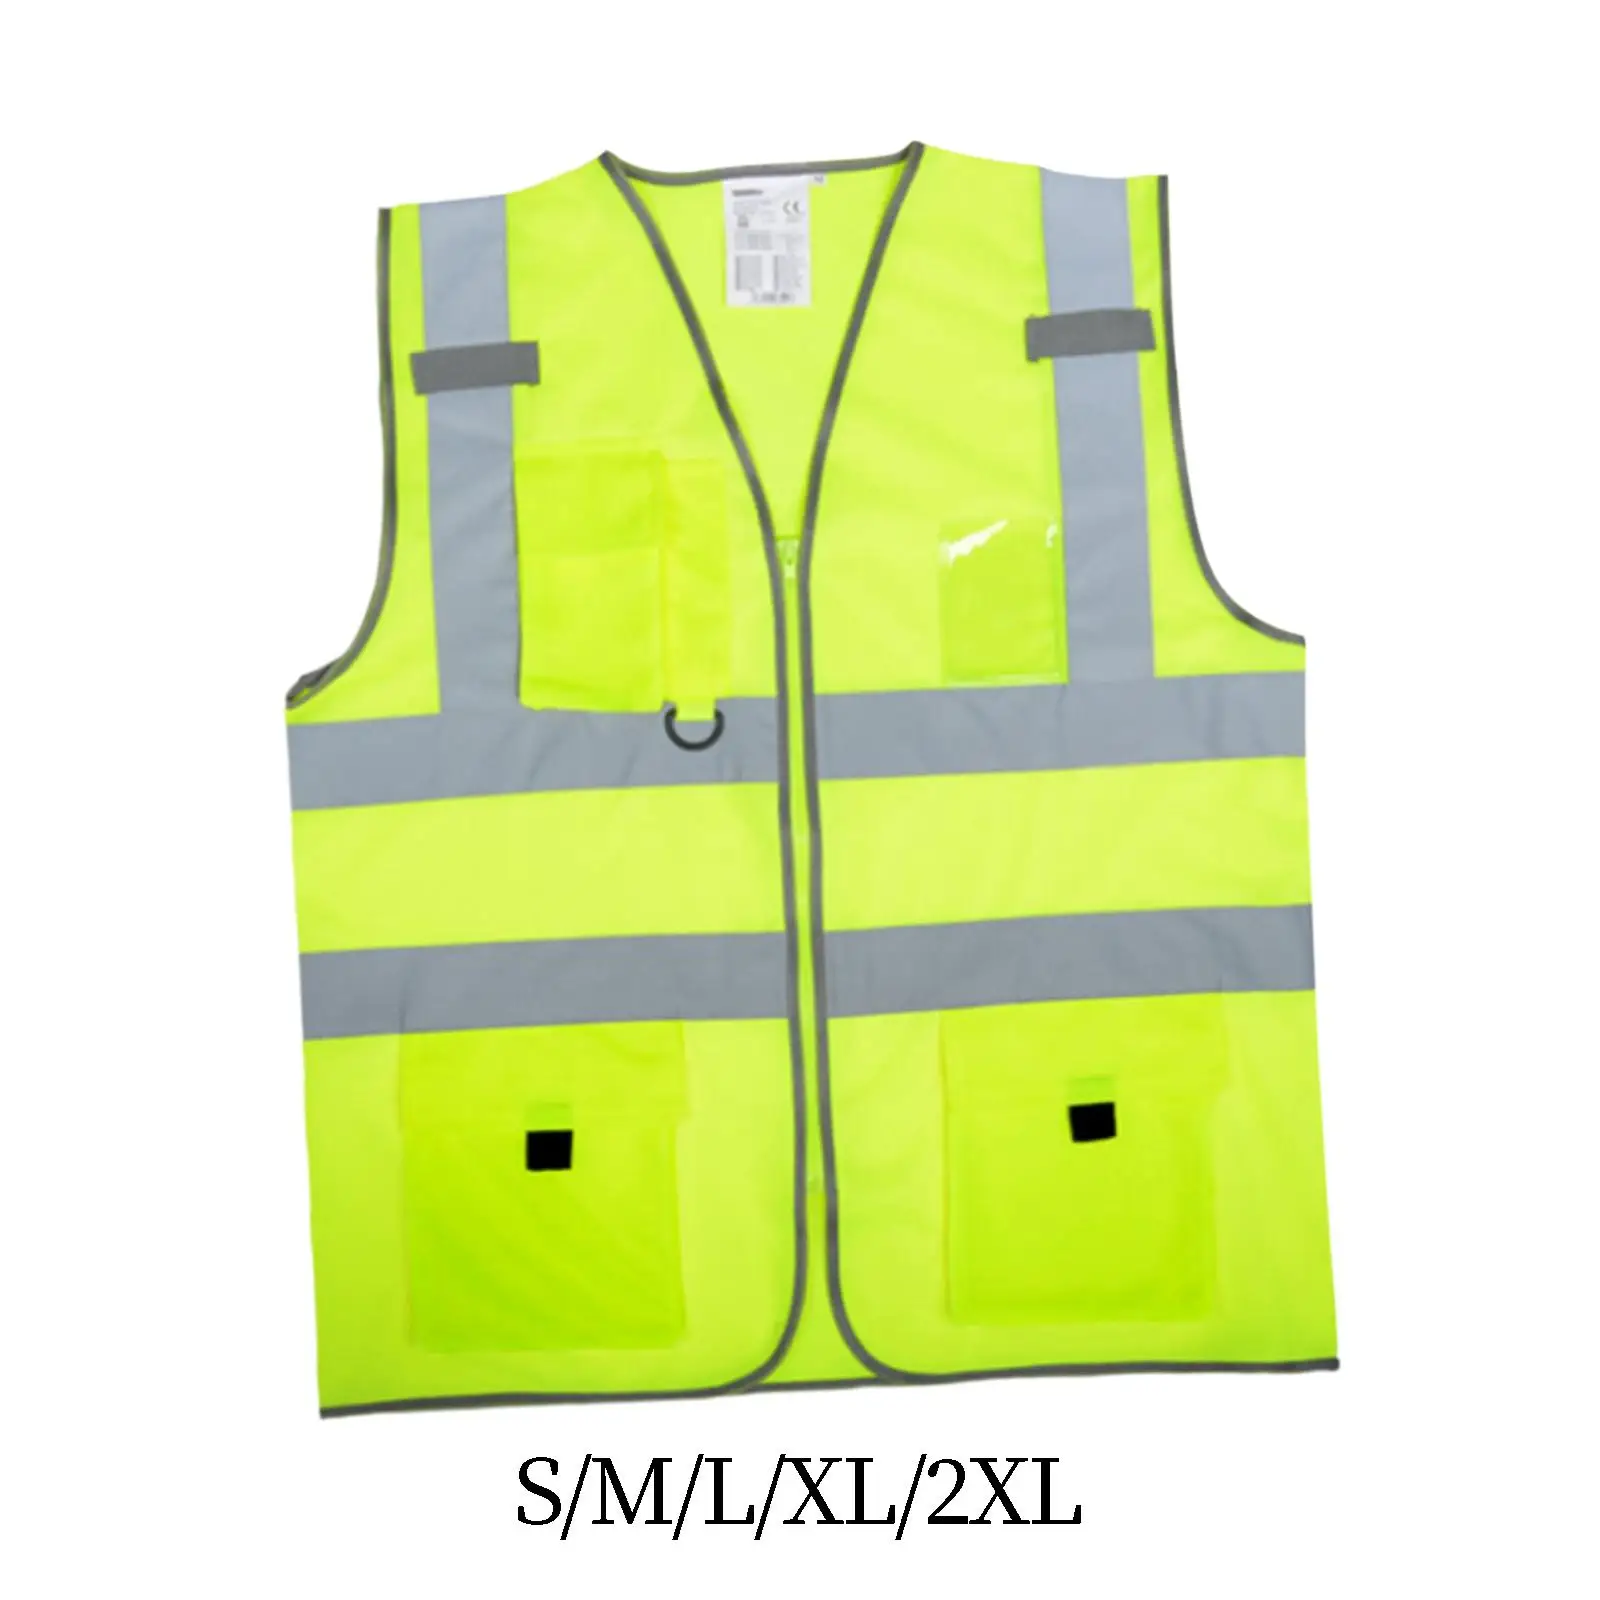 Reflective Vest Comfortable Highlight Construction Gear Construction Vest for Construction Racing Running Sports Airport Workers